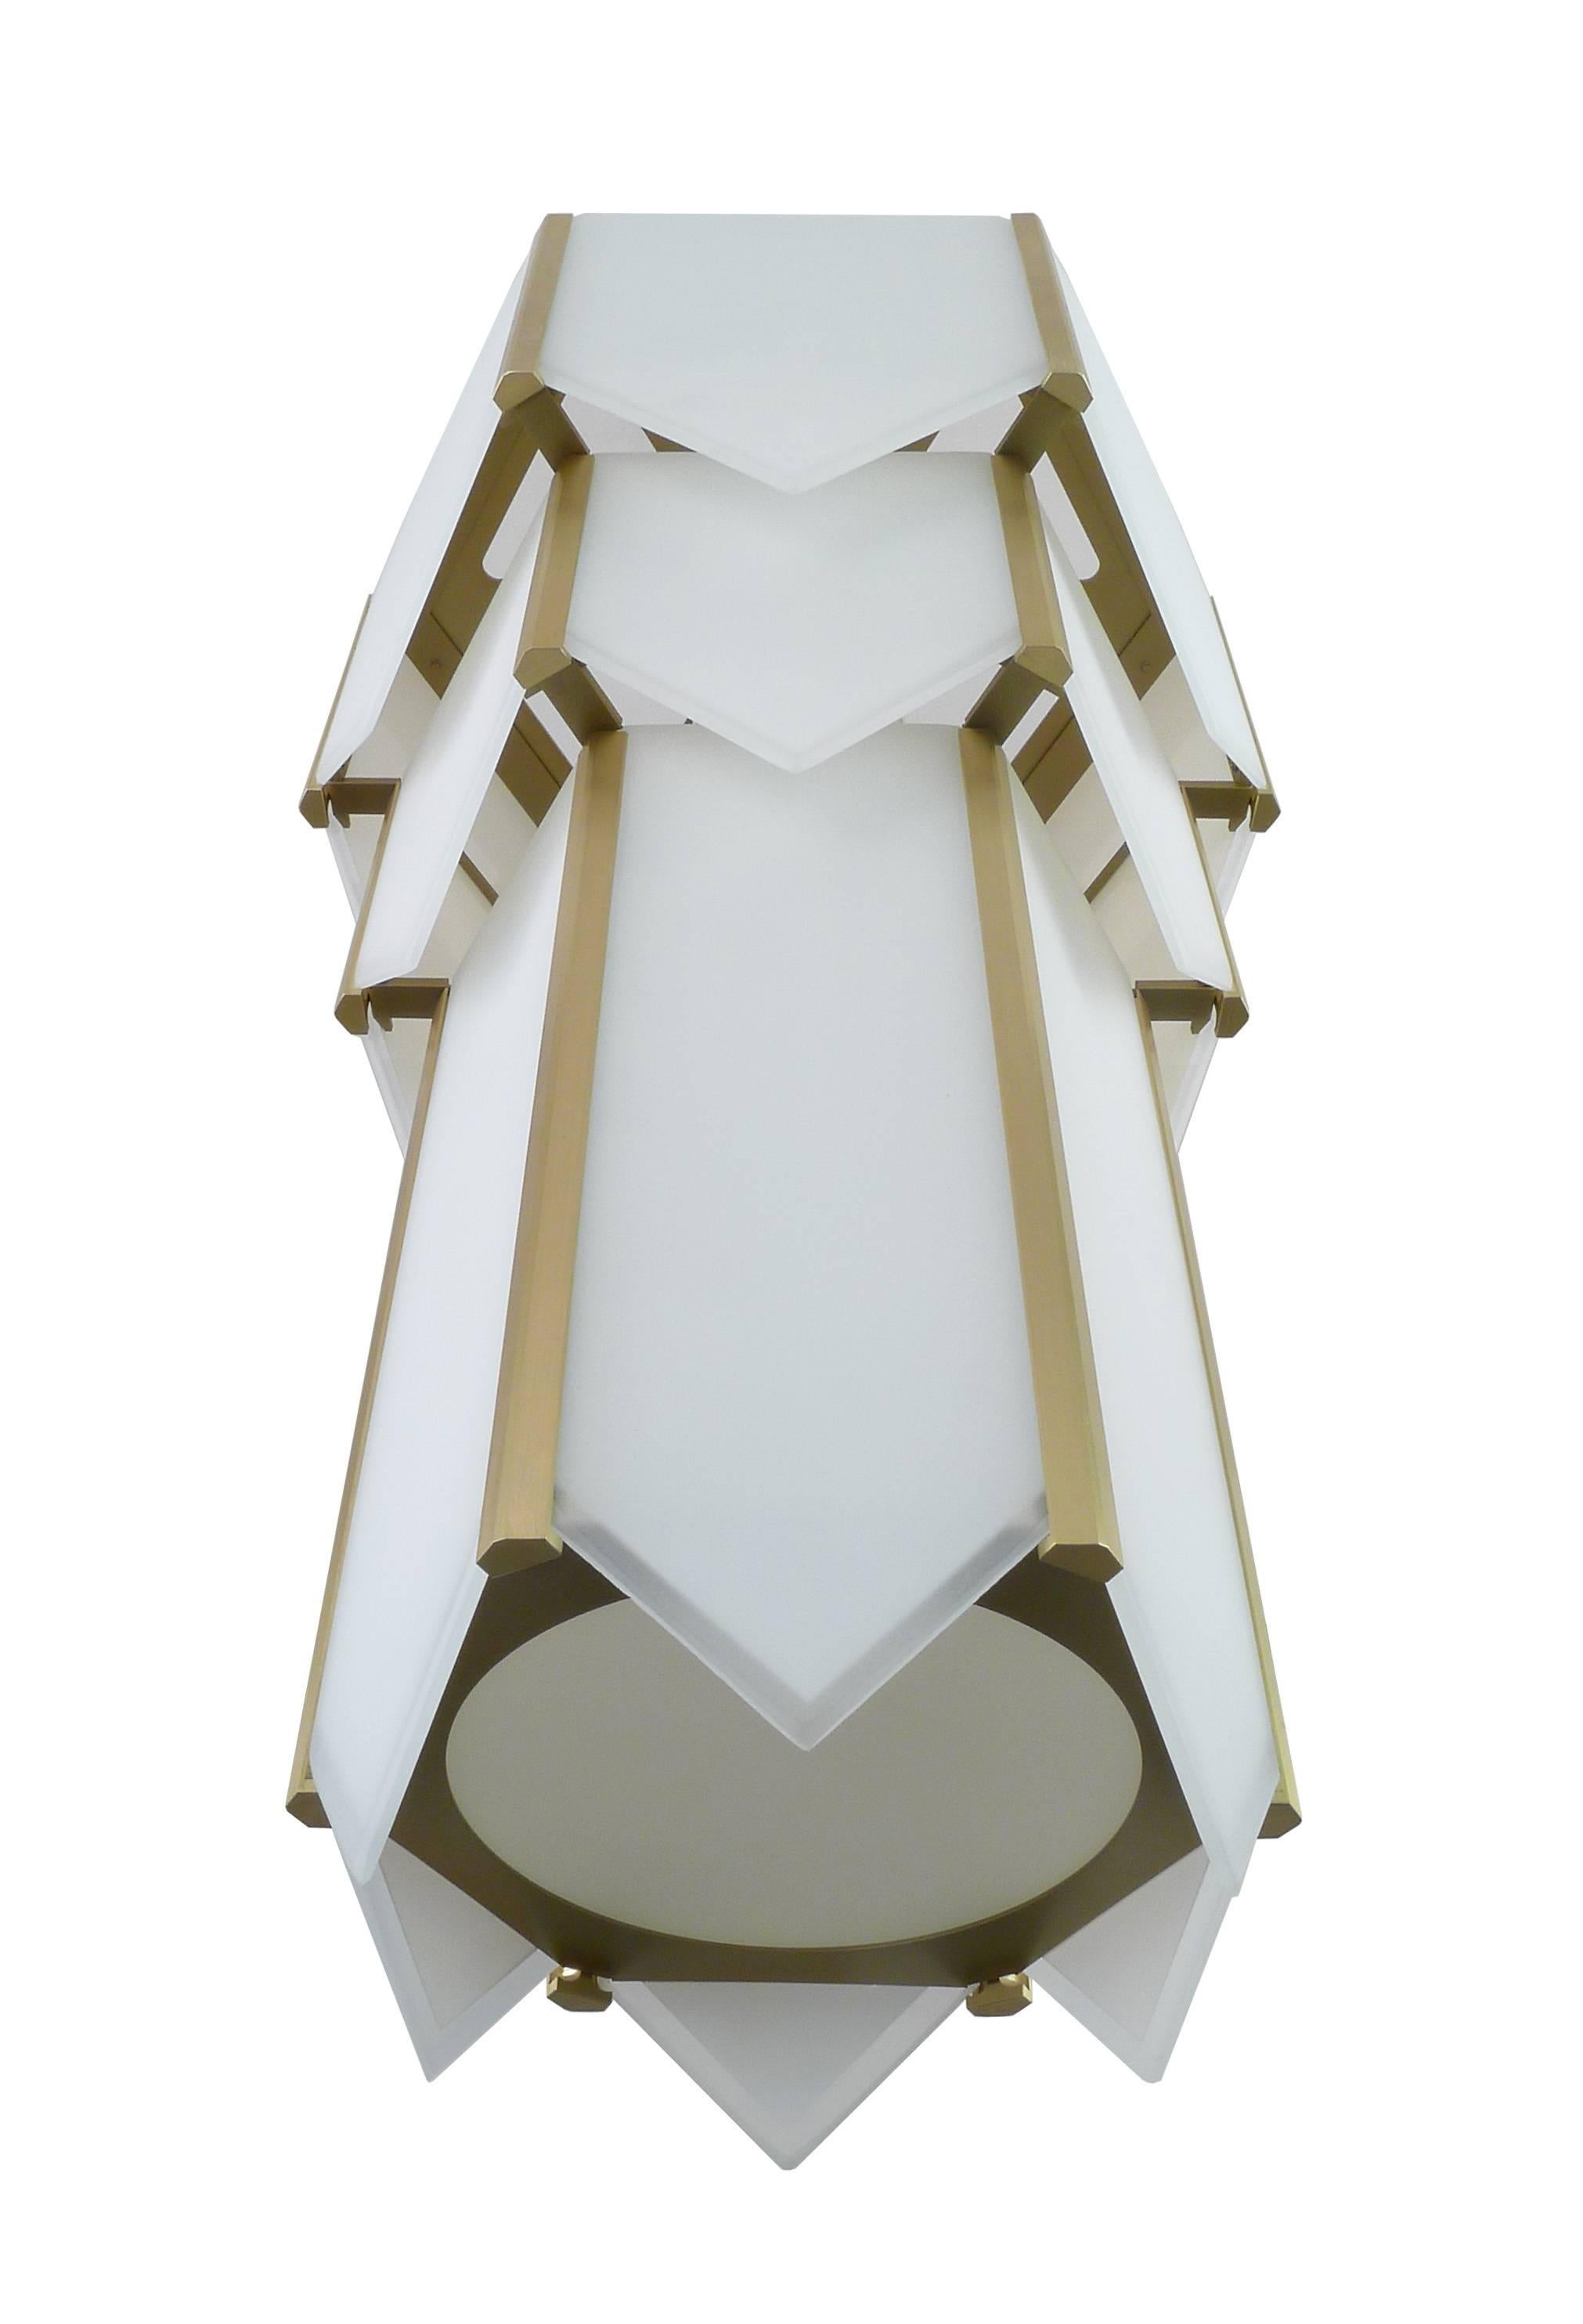 Brass metal hexagonal flush mount fixture with white glass panels. Glass panels have clear line edge detail adds depth and sparkle. Machined brass vertical bars retain glass panels. Incandescent lamping up to 100 watts.

Architect, Sandy Littman of